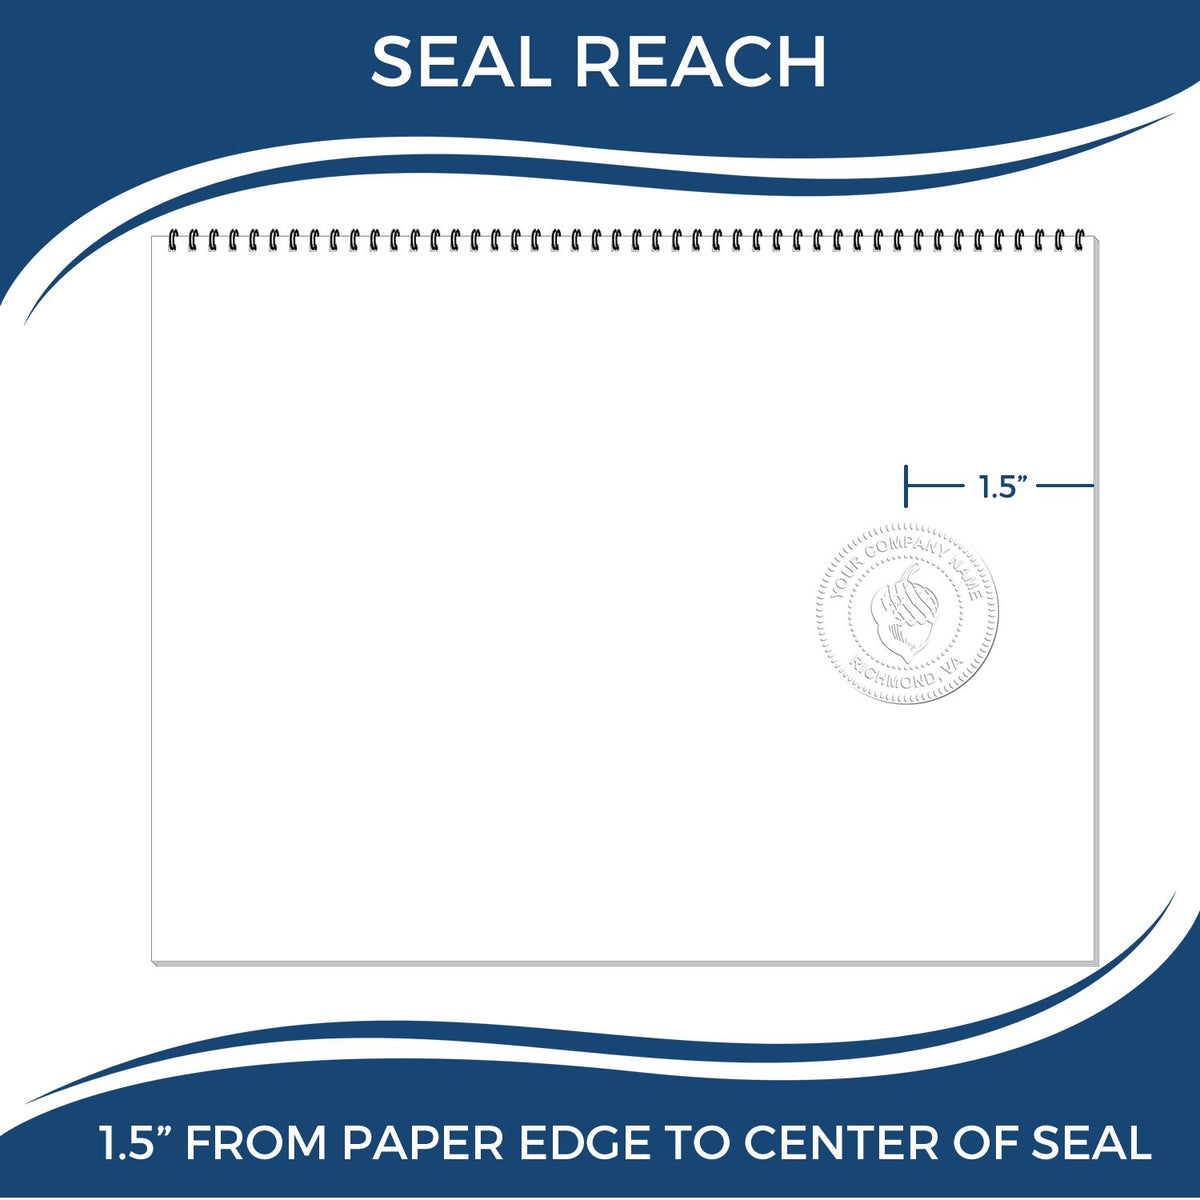 An infographic showing the seal reach which is represented by a ruler and a miniature seal image of the Gift Nebraska Architect Seal